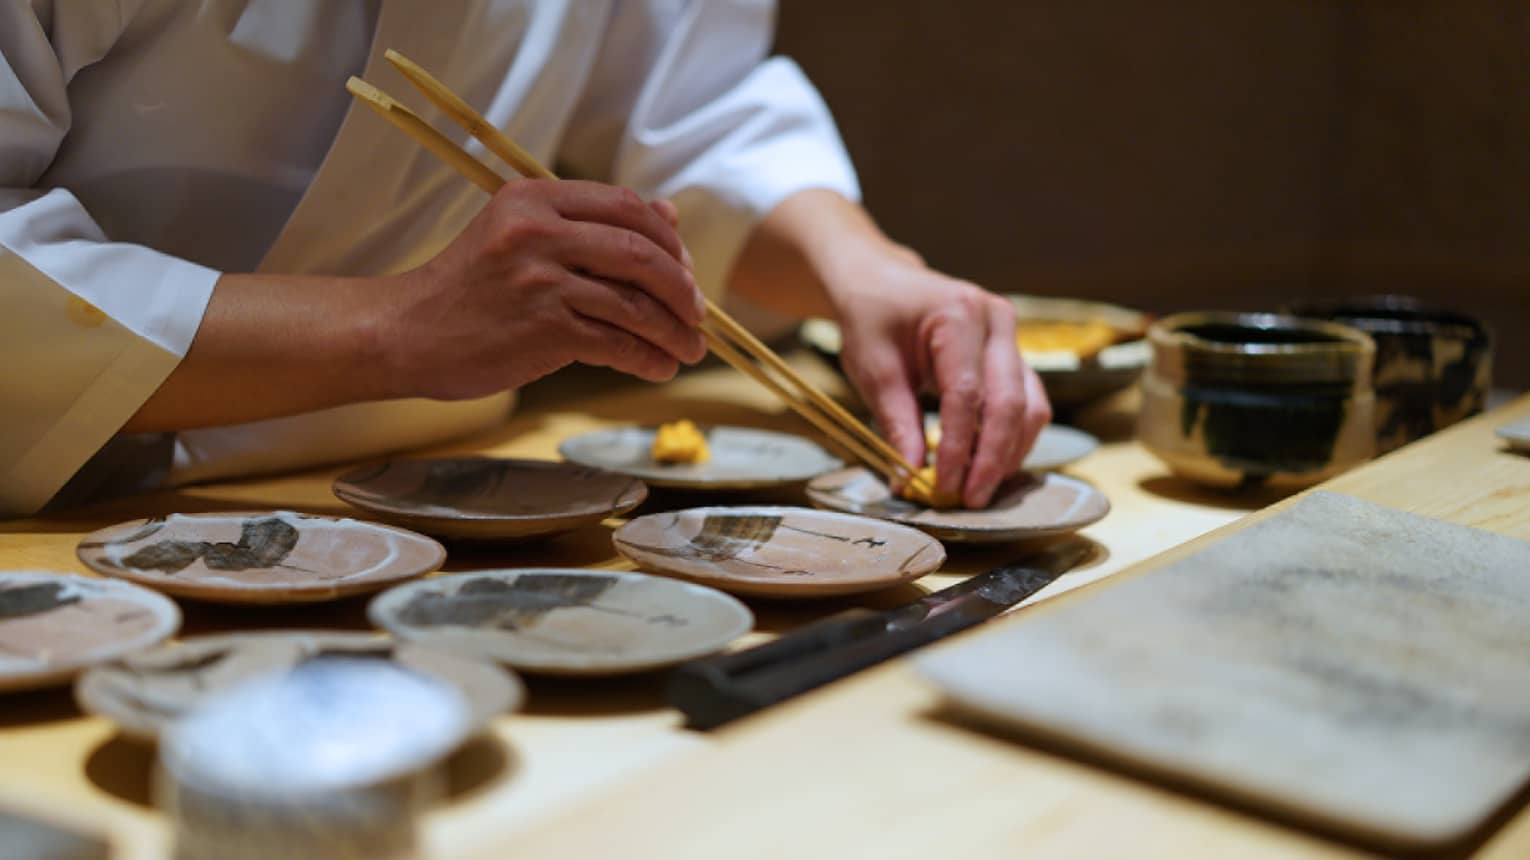 Close up of a chef using chopsticks to place a Food detail on a ceramic plate